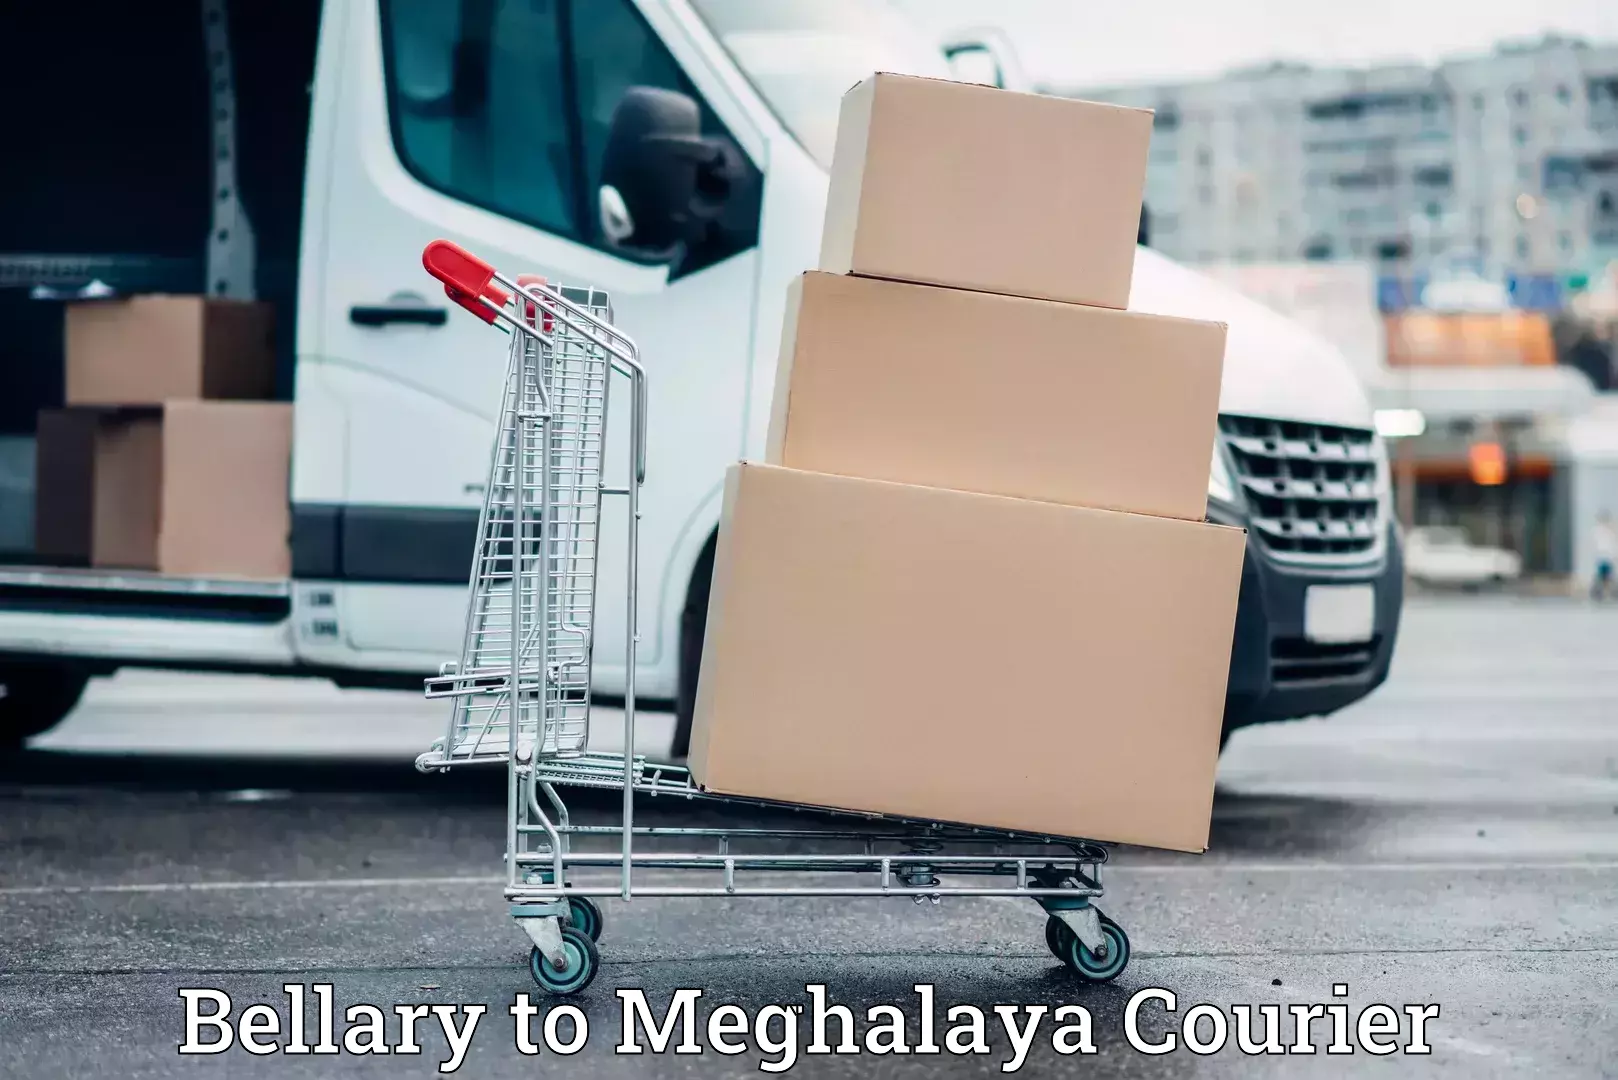 Furniture relocation experts Bellary to Meghalaya